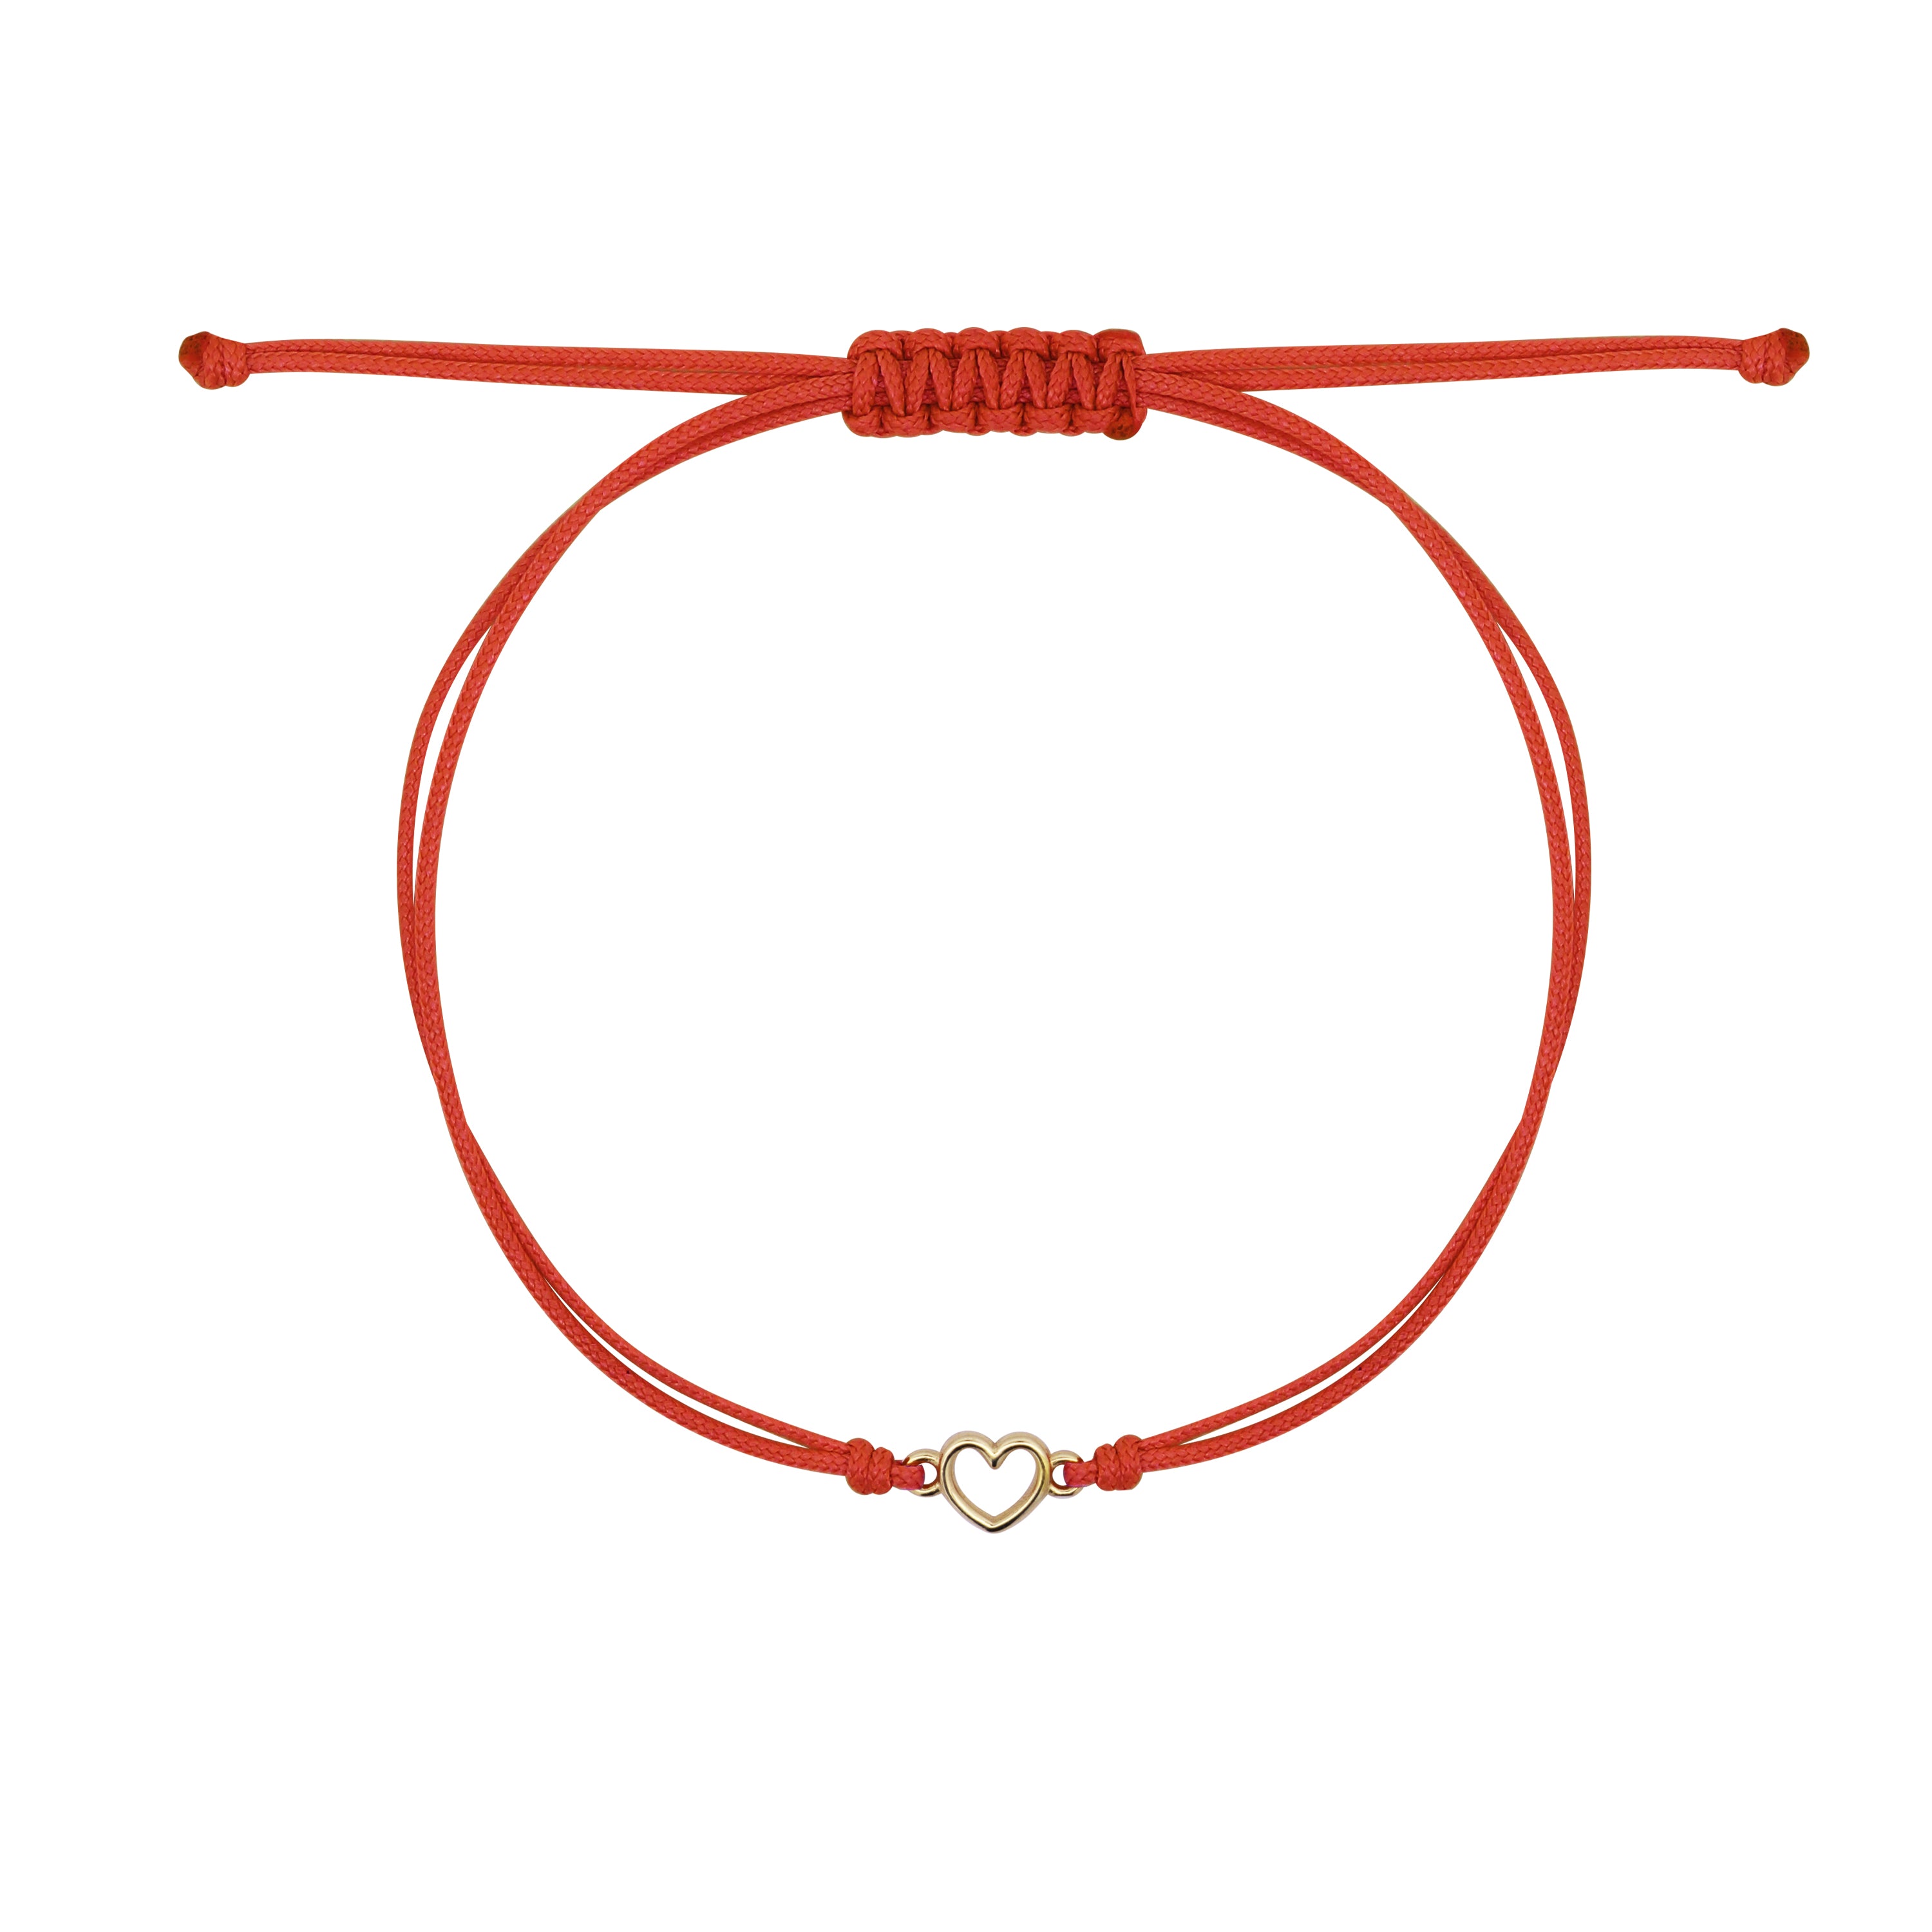 Bracelets - Bracelet with fabric and line heart - ORO18KT - 2 | Rue des Mille